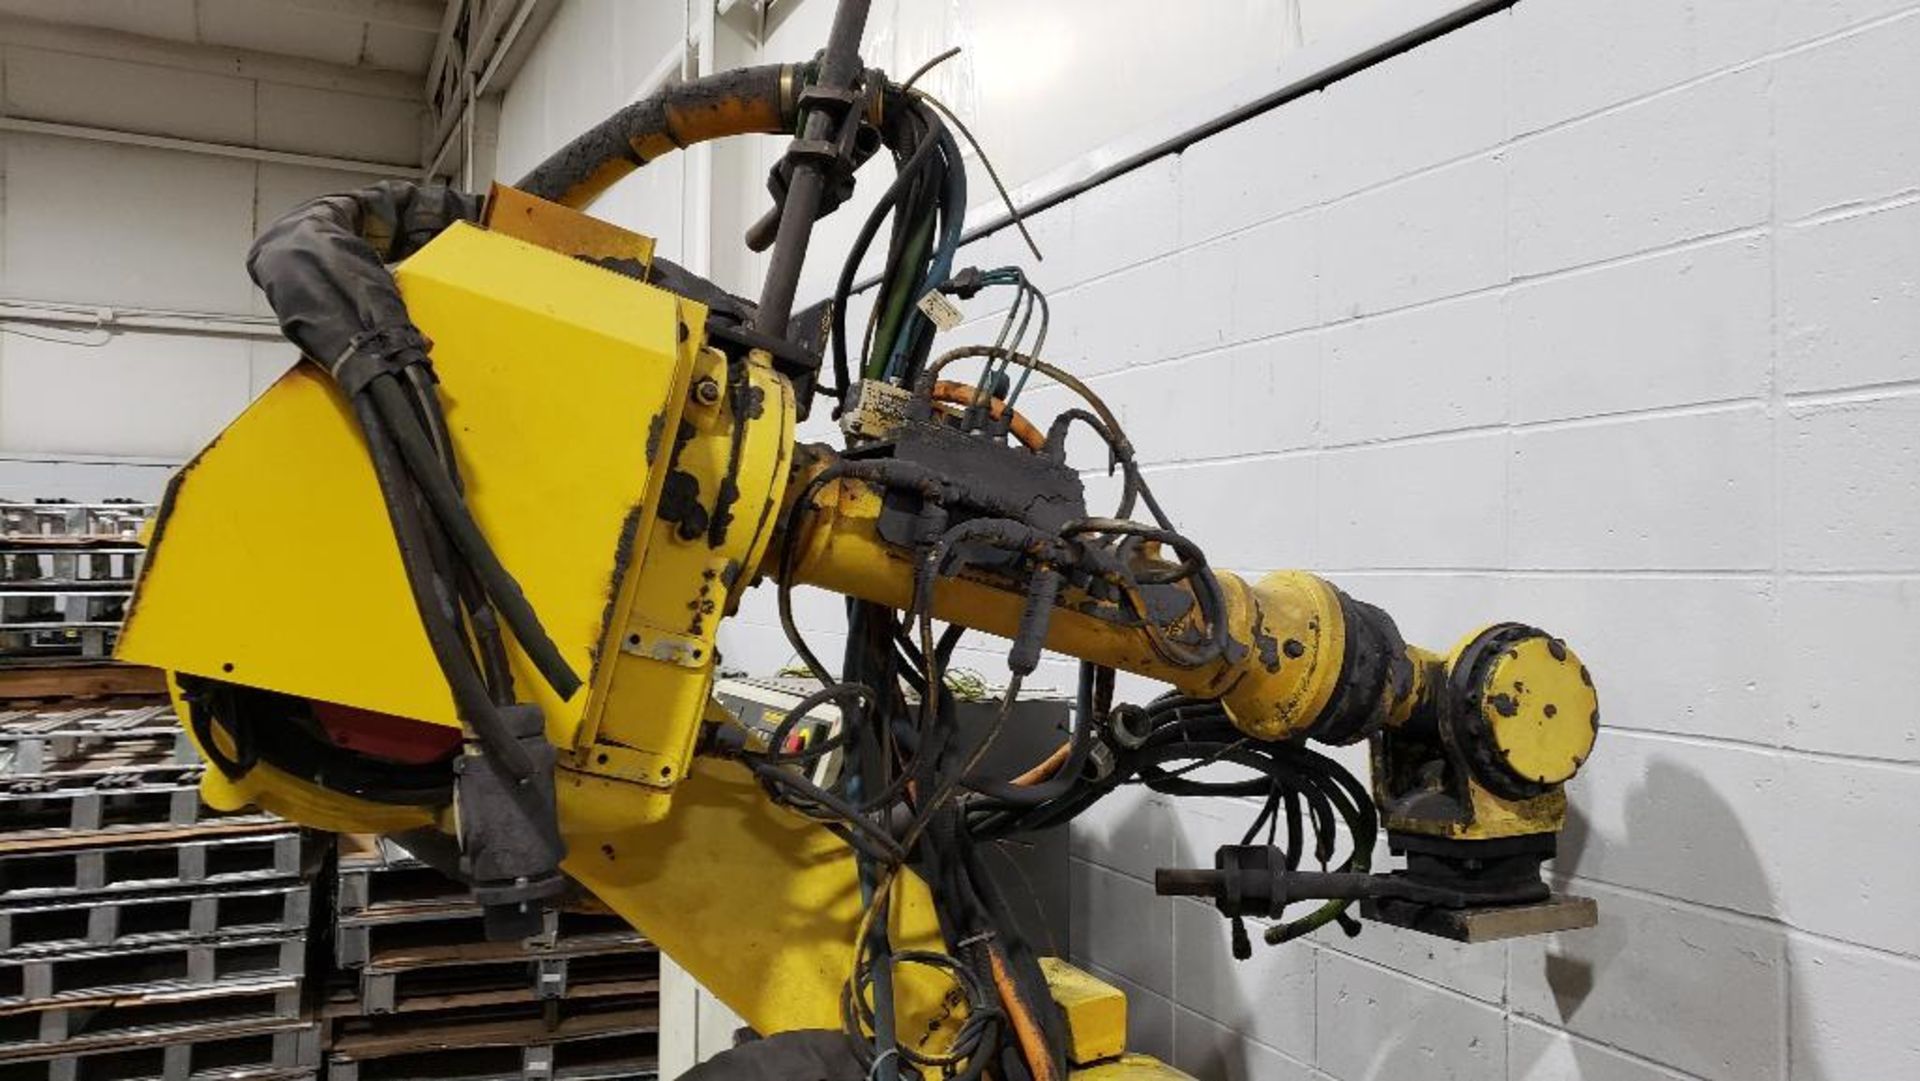 Fanuc R-2000iA/165F robot with Fanuc System R-J3iB controller. - Image 7 of 13